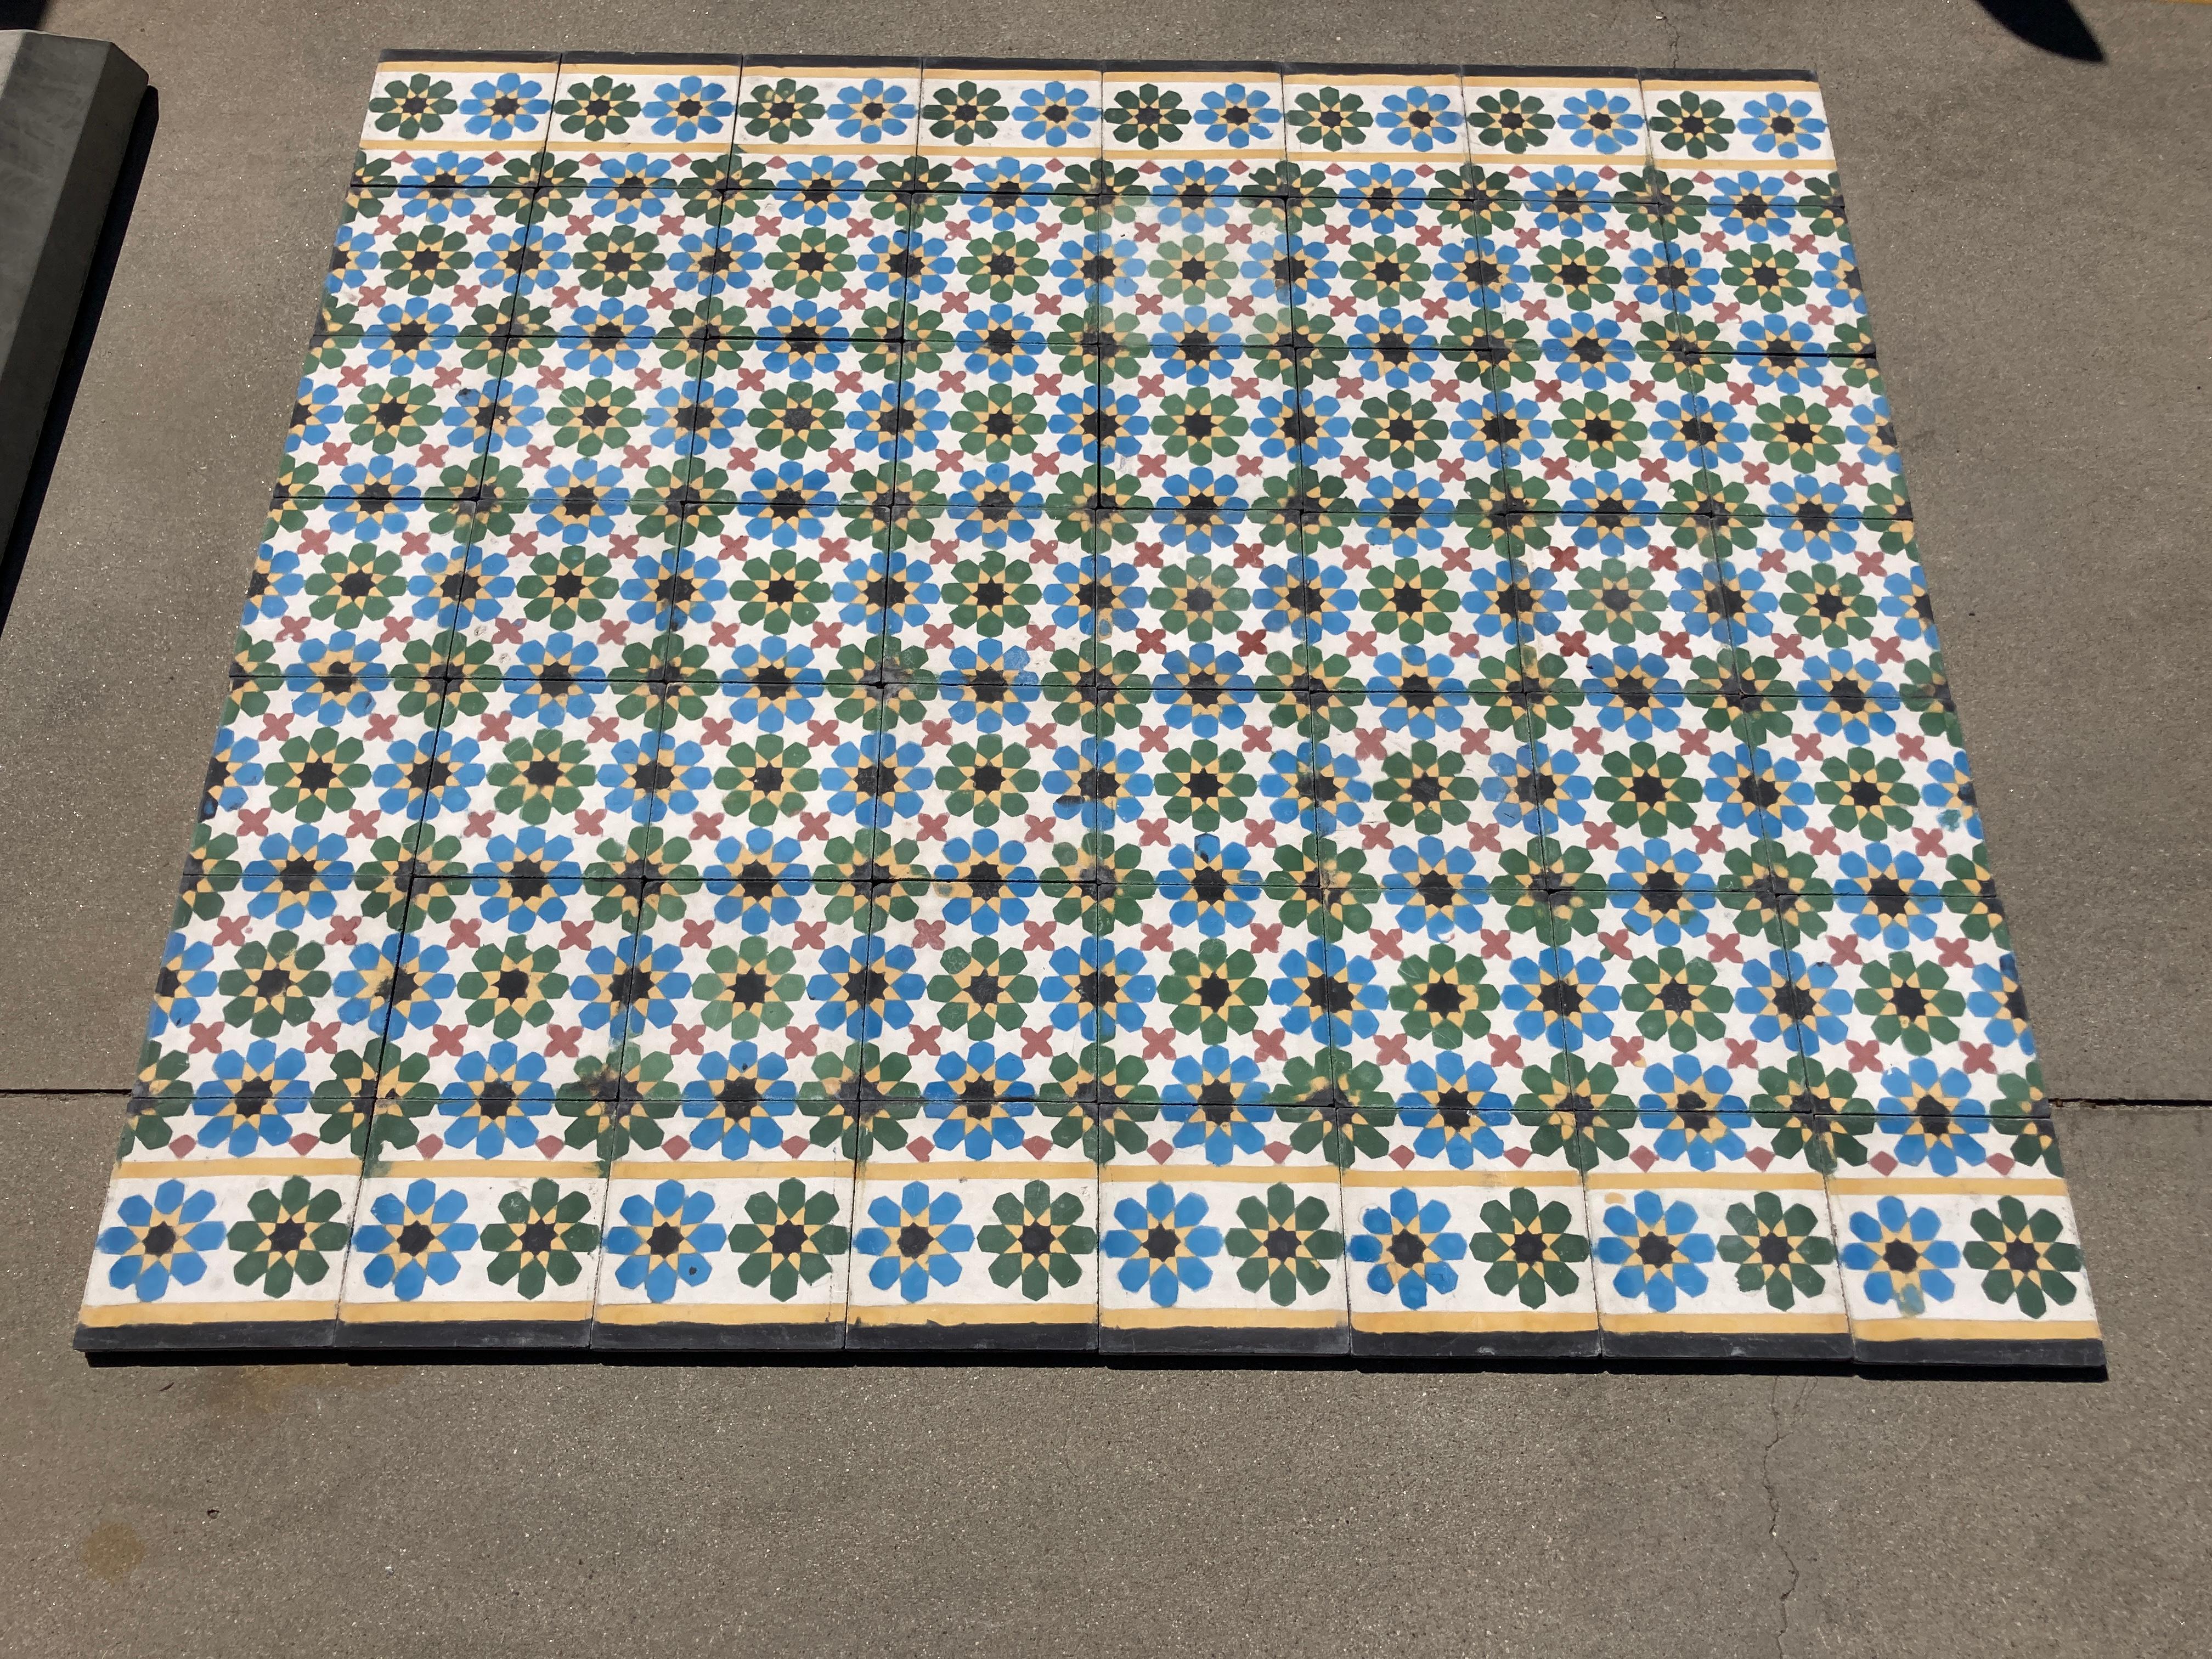 Moroccan handcrafted and hand-painted cement tile with traditional Fez Moorish Design.
Moroccan encaustic encaustic floor or wall tiles with Traditional Fez Design
These are authentic Moroccan encaustic tiles hand made by artisans in Fez Morocco.